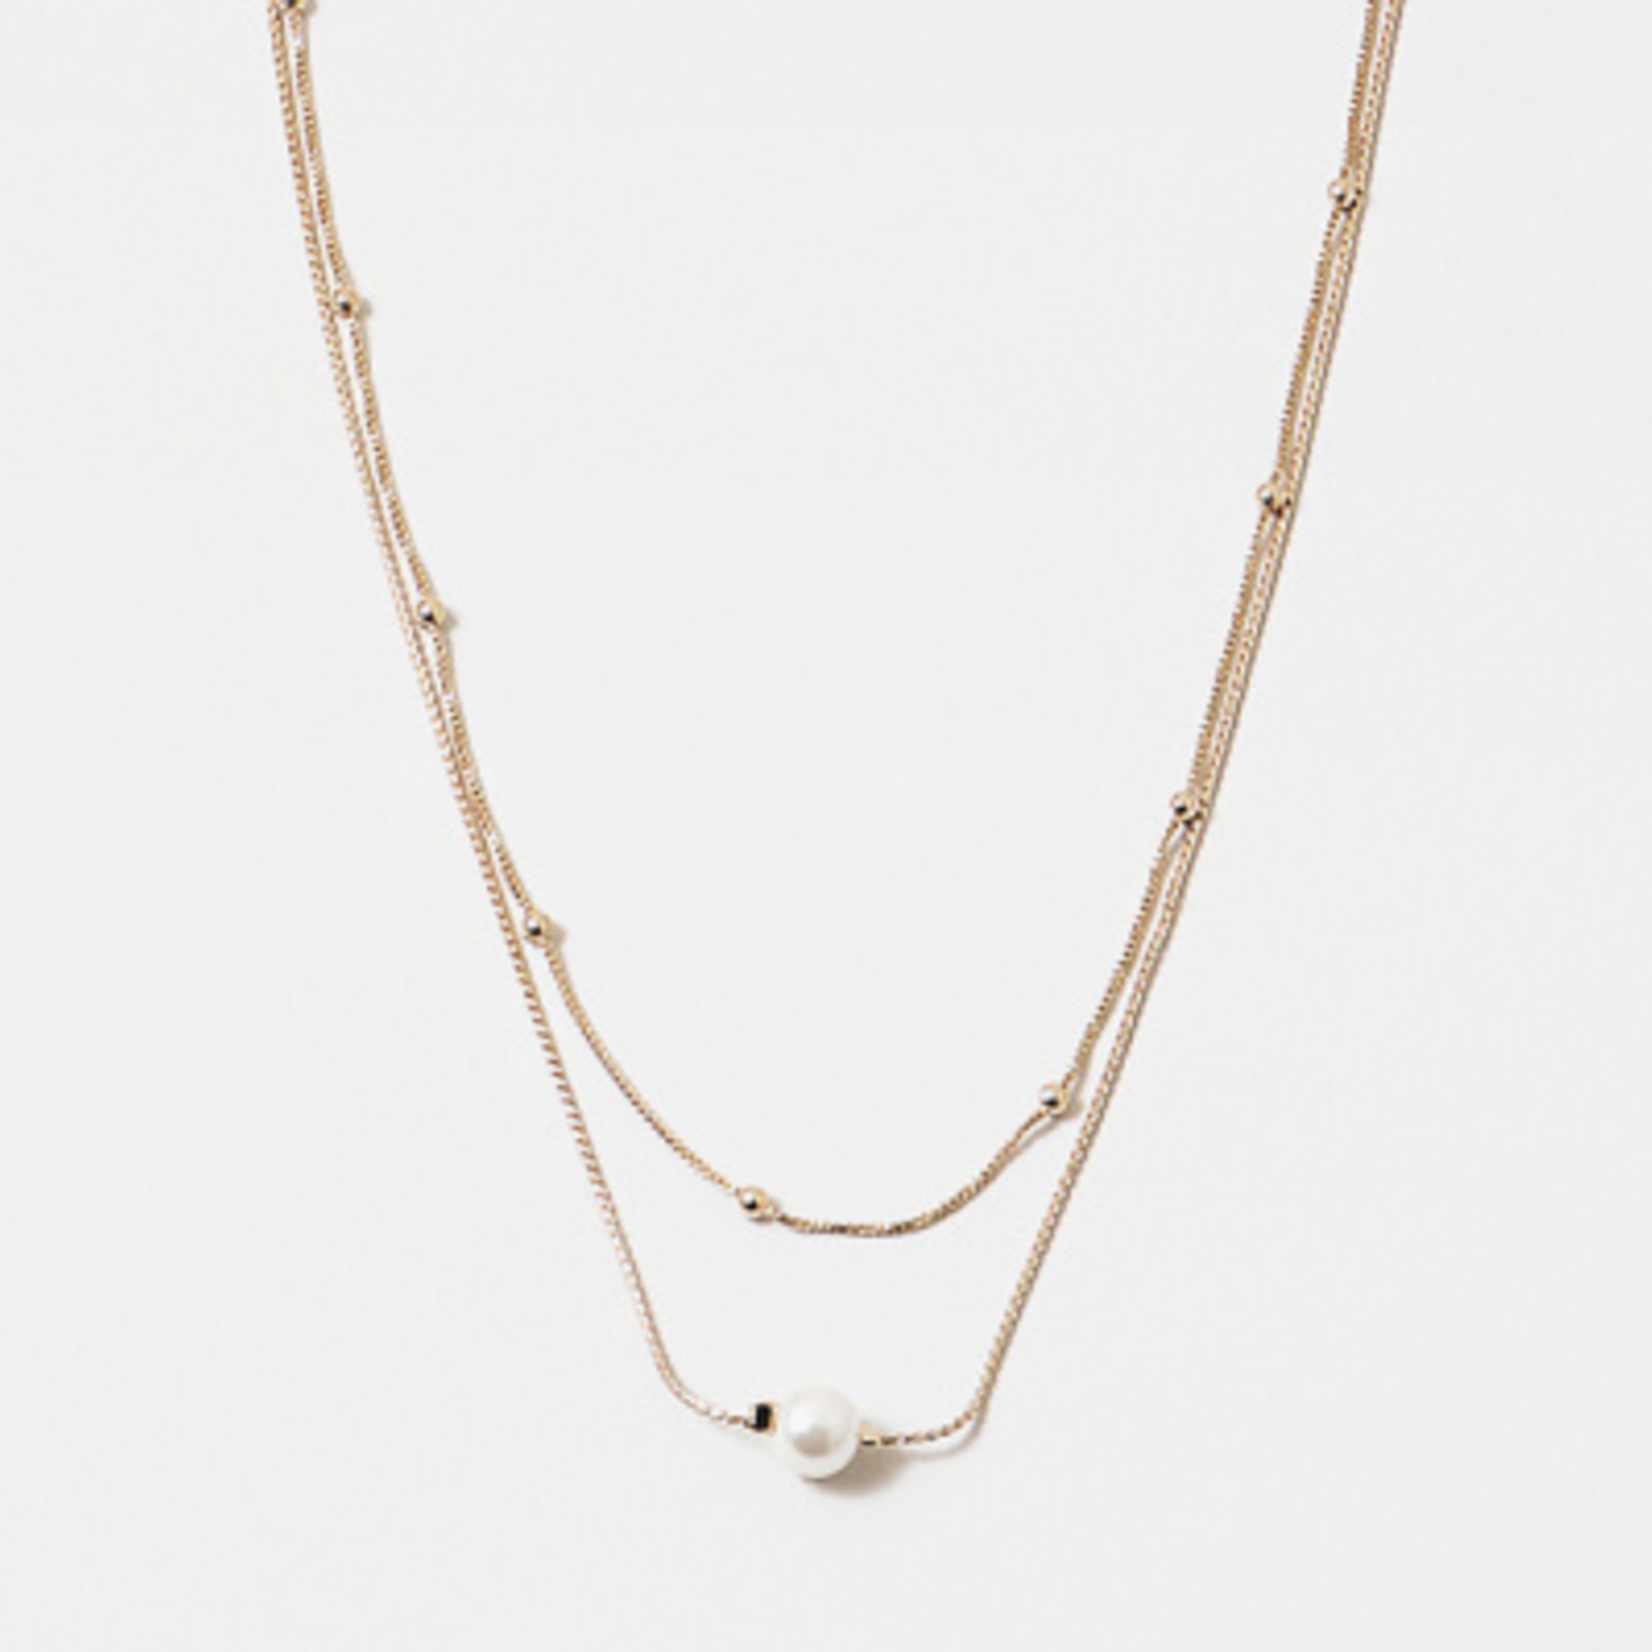 Dainty Layered Gold Ball Chain Necklace w/ Pearl Bead